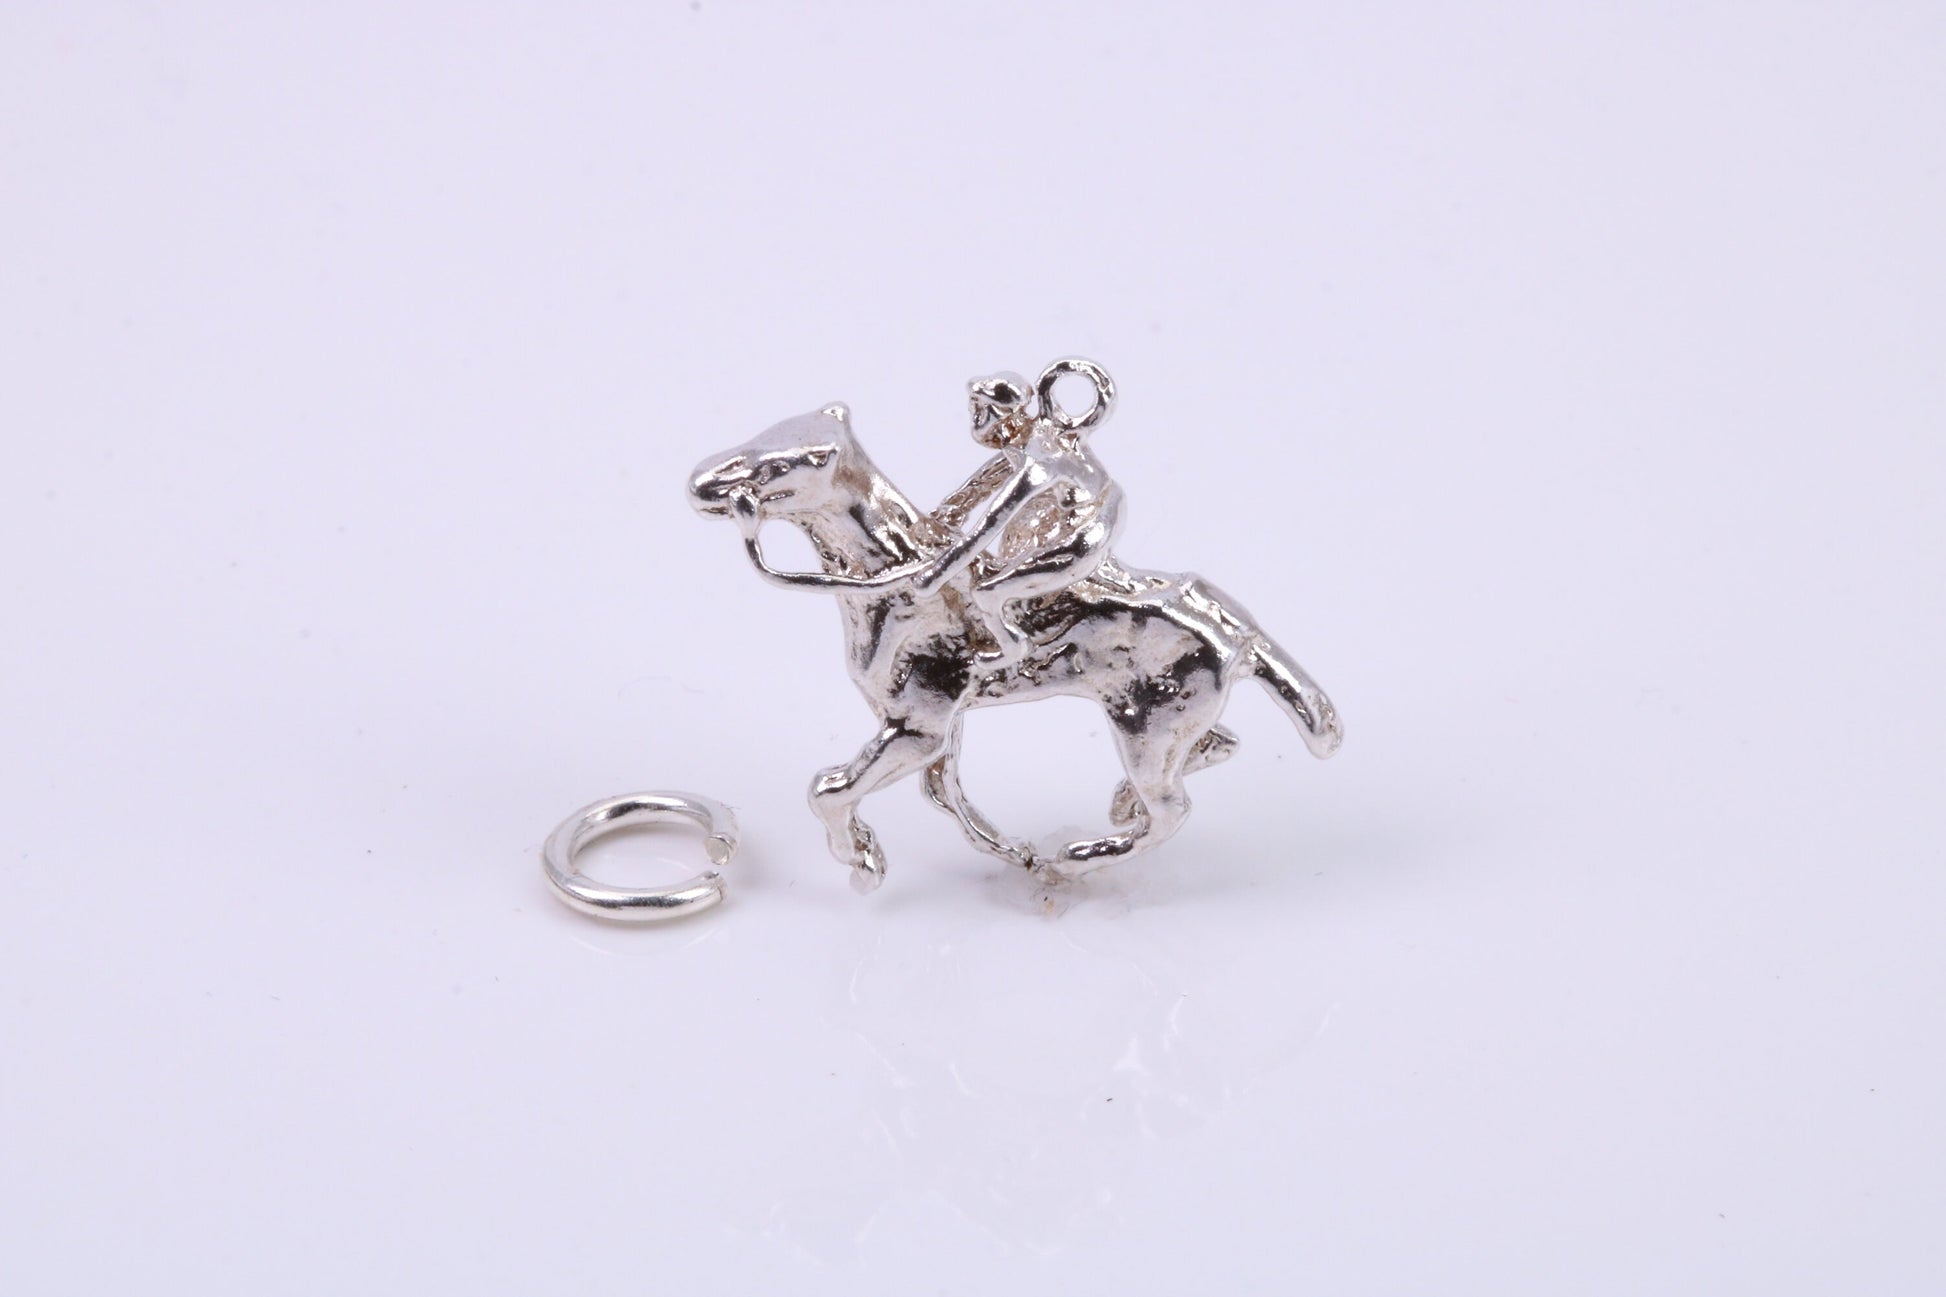 Jockey on Horse Charm, Traditional Charm, Made from Solid 925 Grade Sterling Silver, Complete with Attachment Link